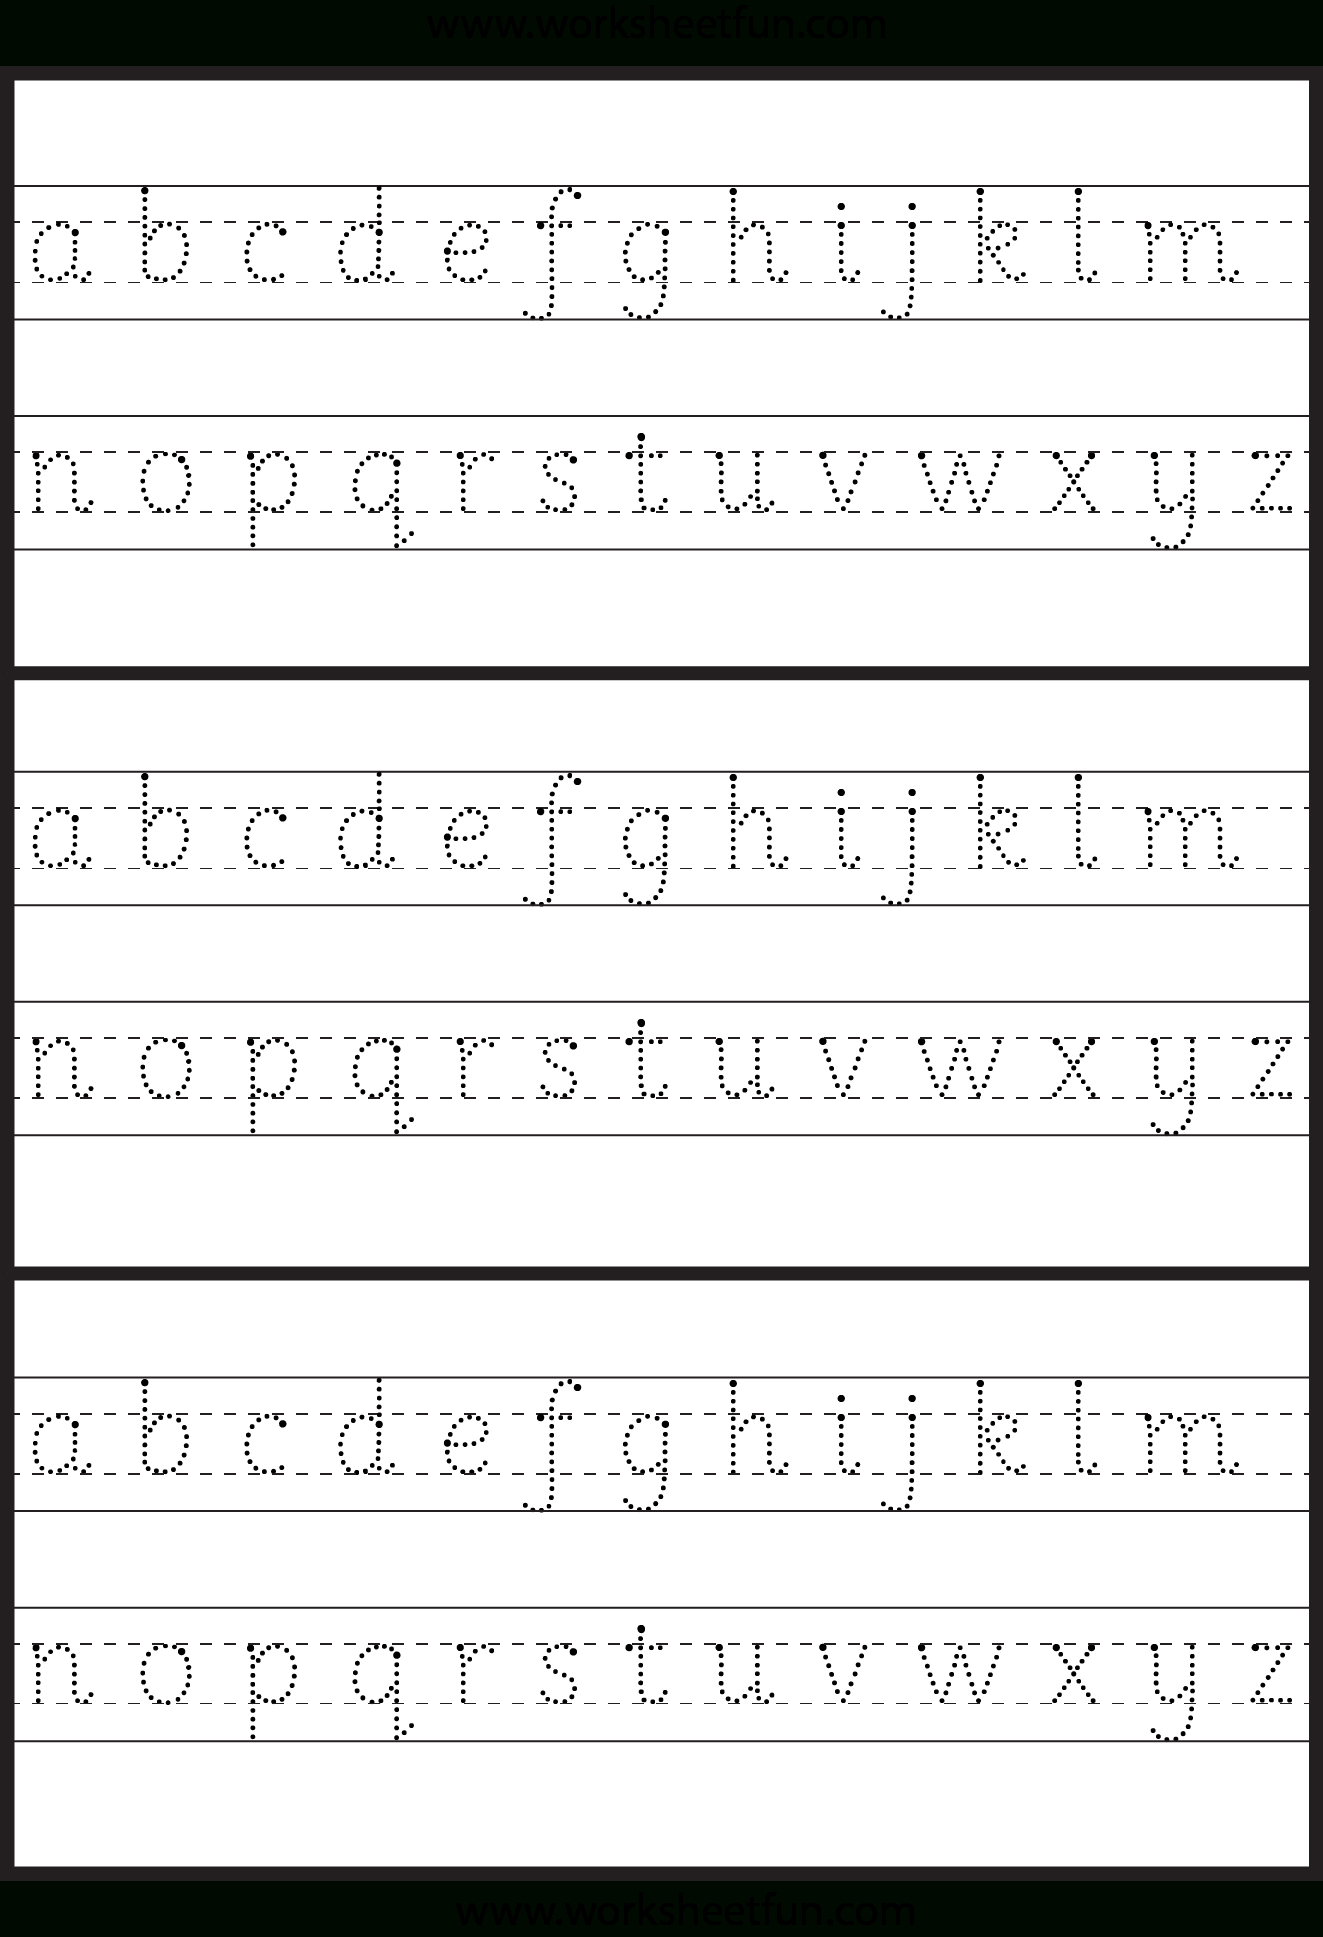 how-to-make-tracing-letter-in-word-letter-tracing-worksheets